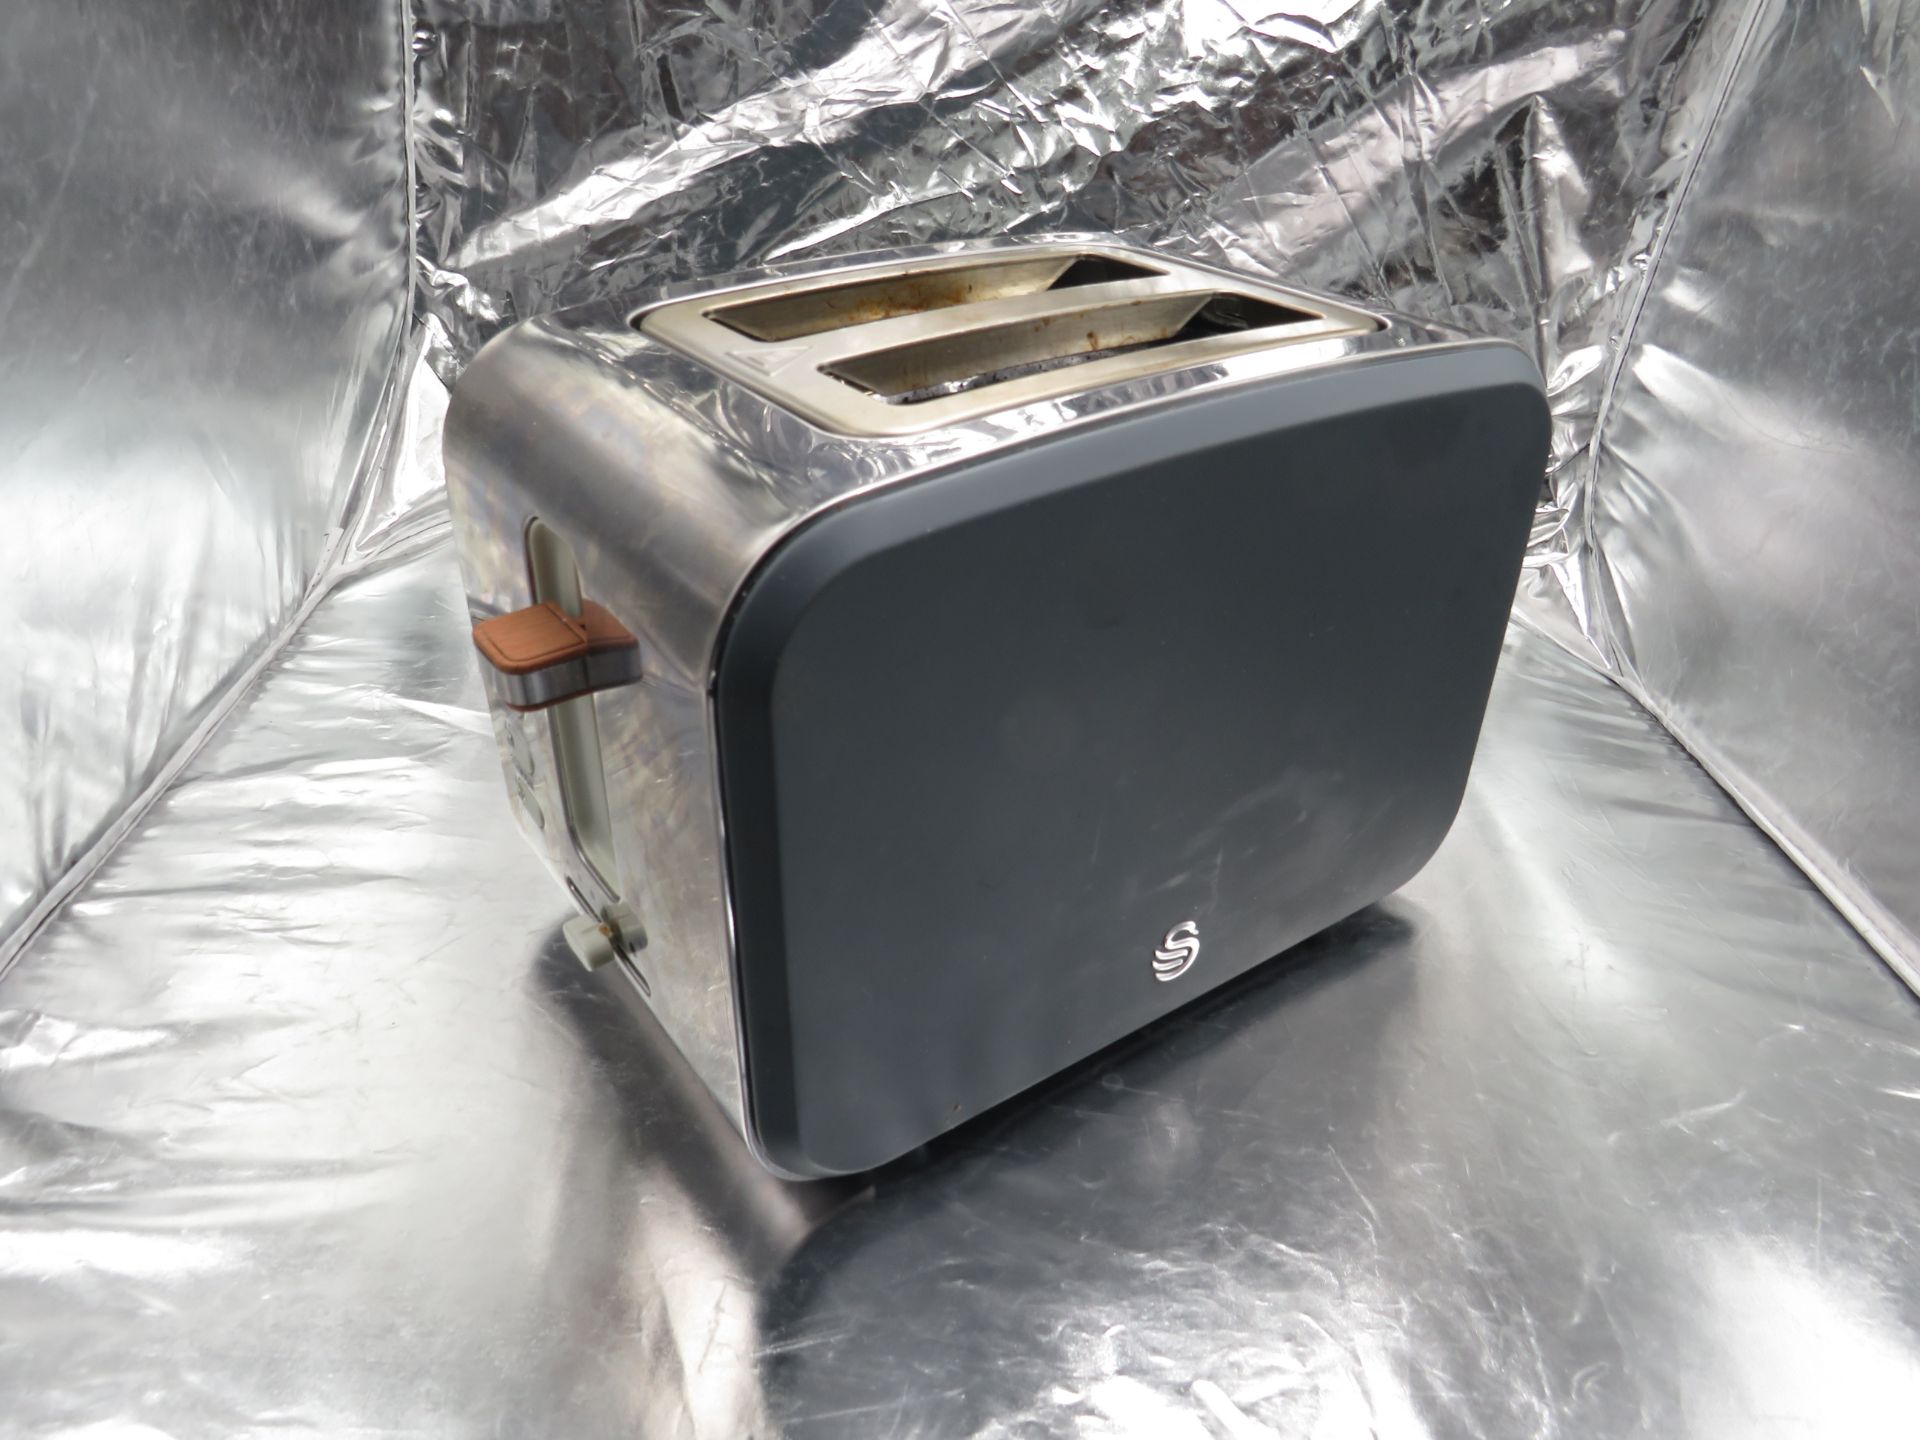 Swan 2 slice toaster, has been used but is working as in the elements heat up, comes with original